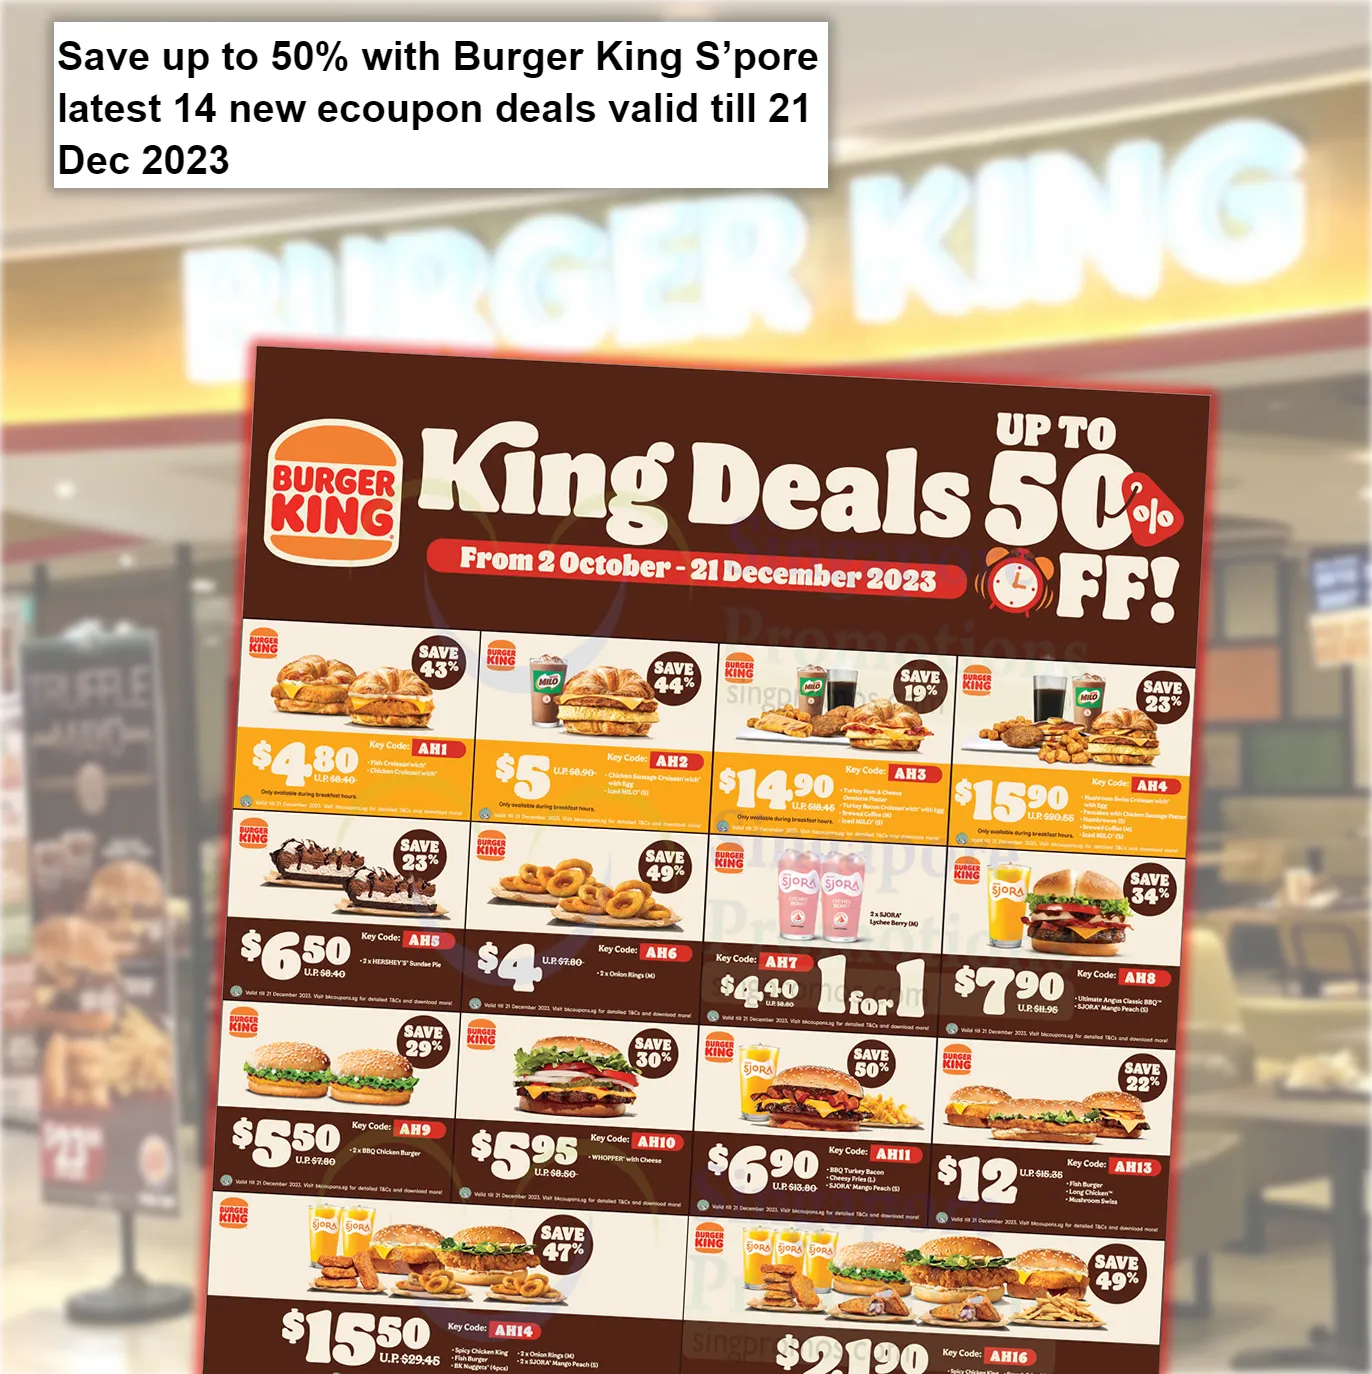 Up to 50% Burger King Coupons at S’pore 😍😱's images(0)